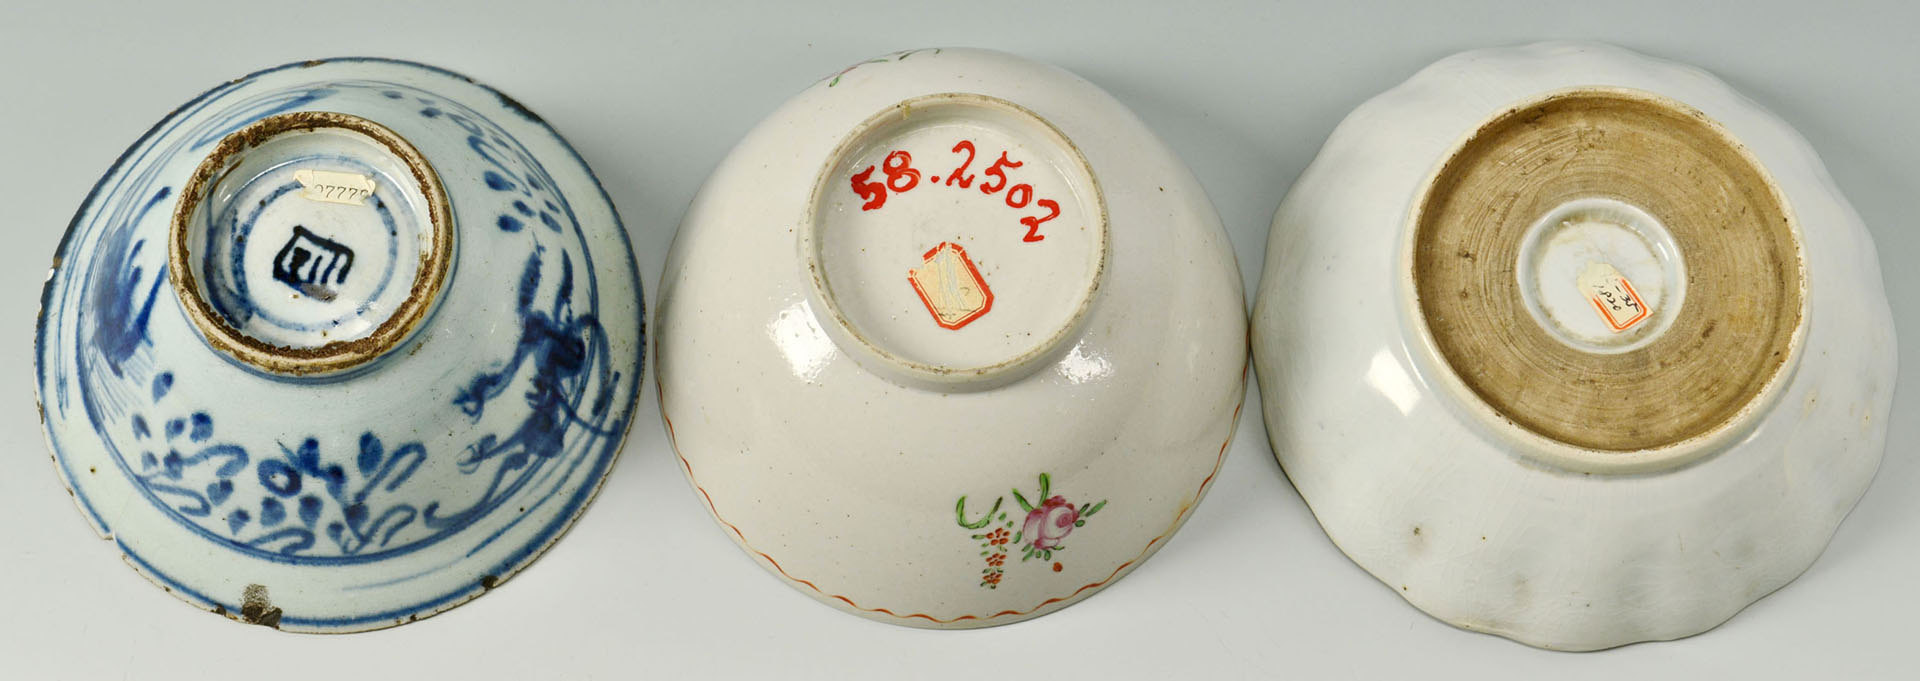 Lot 3088299: Group of Chinese Ceramics, 18th-early 20th c.